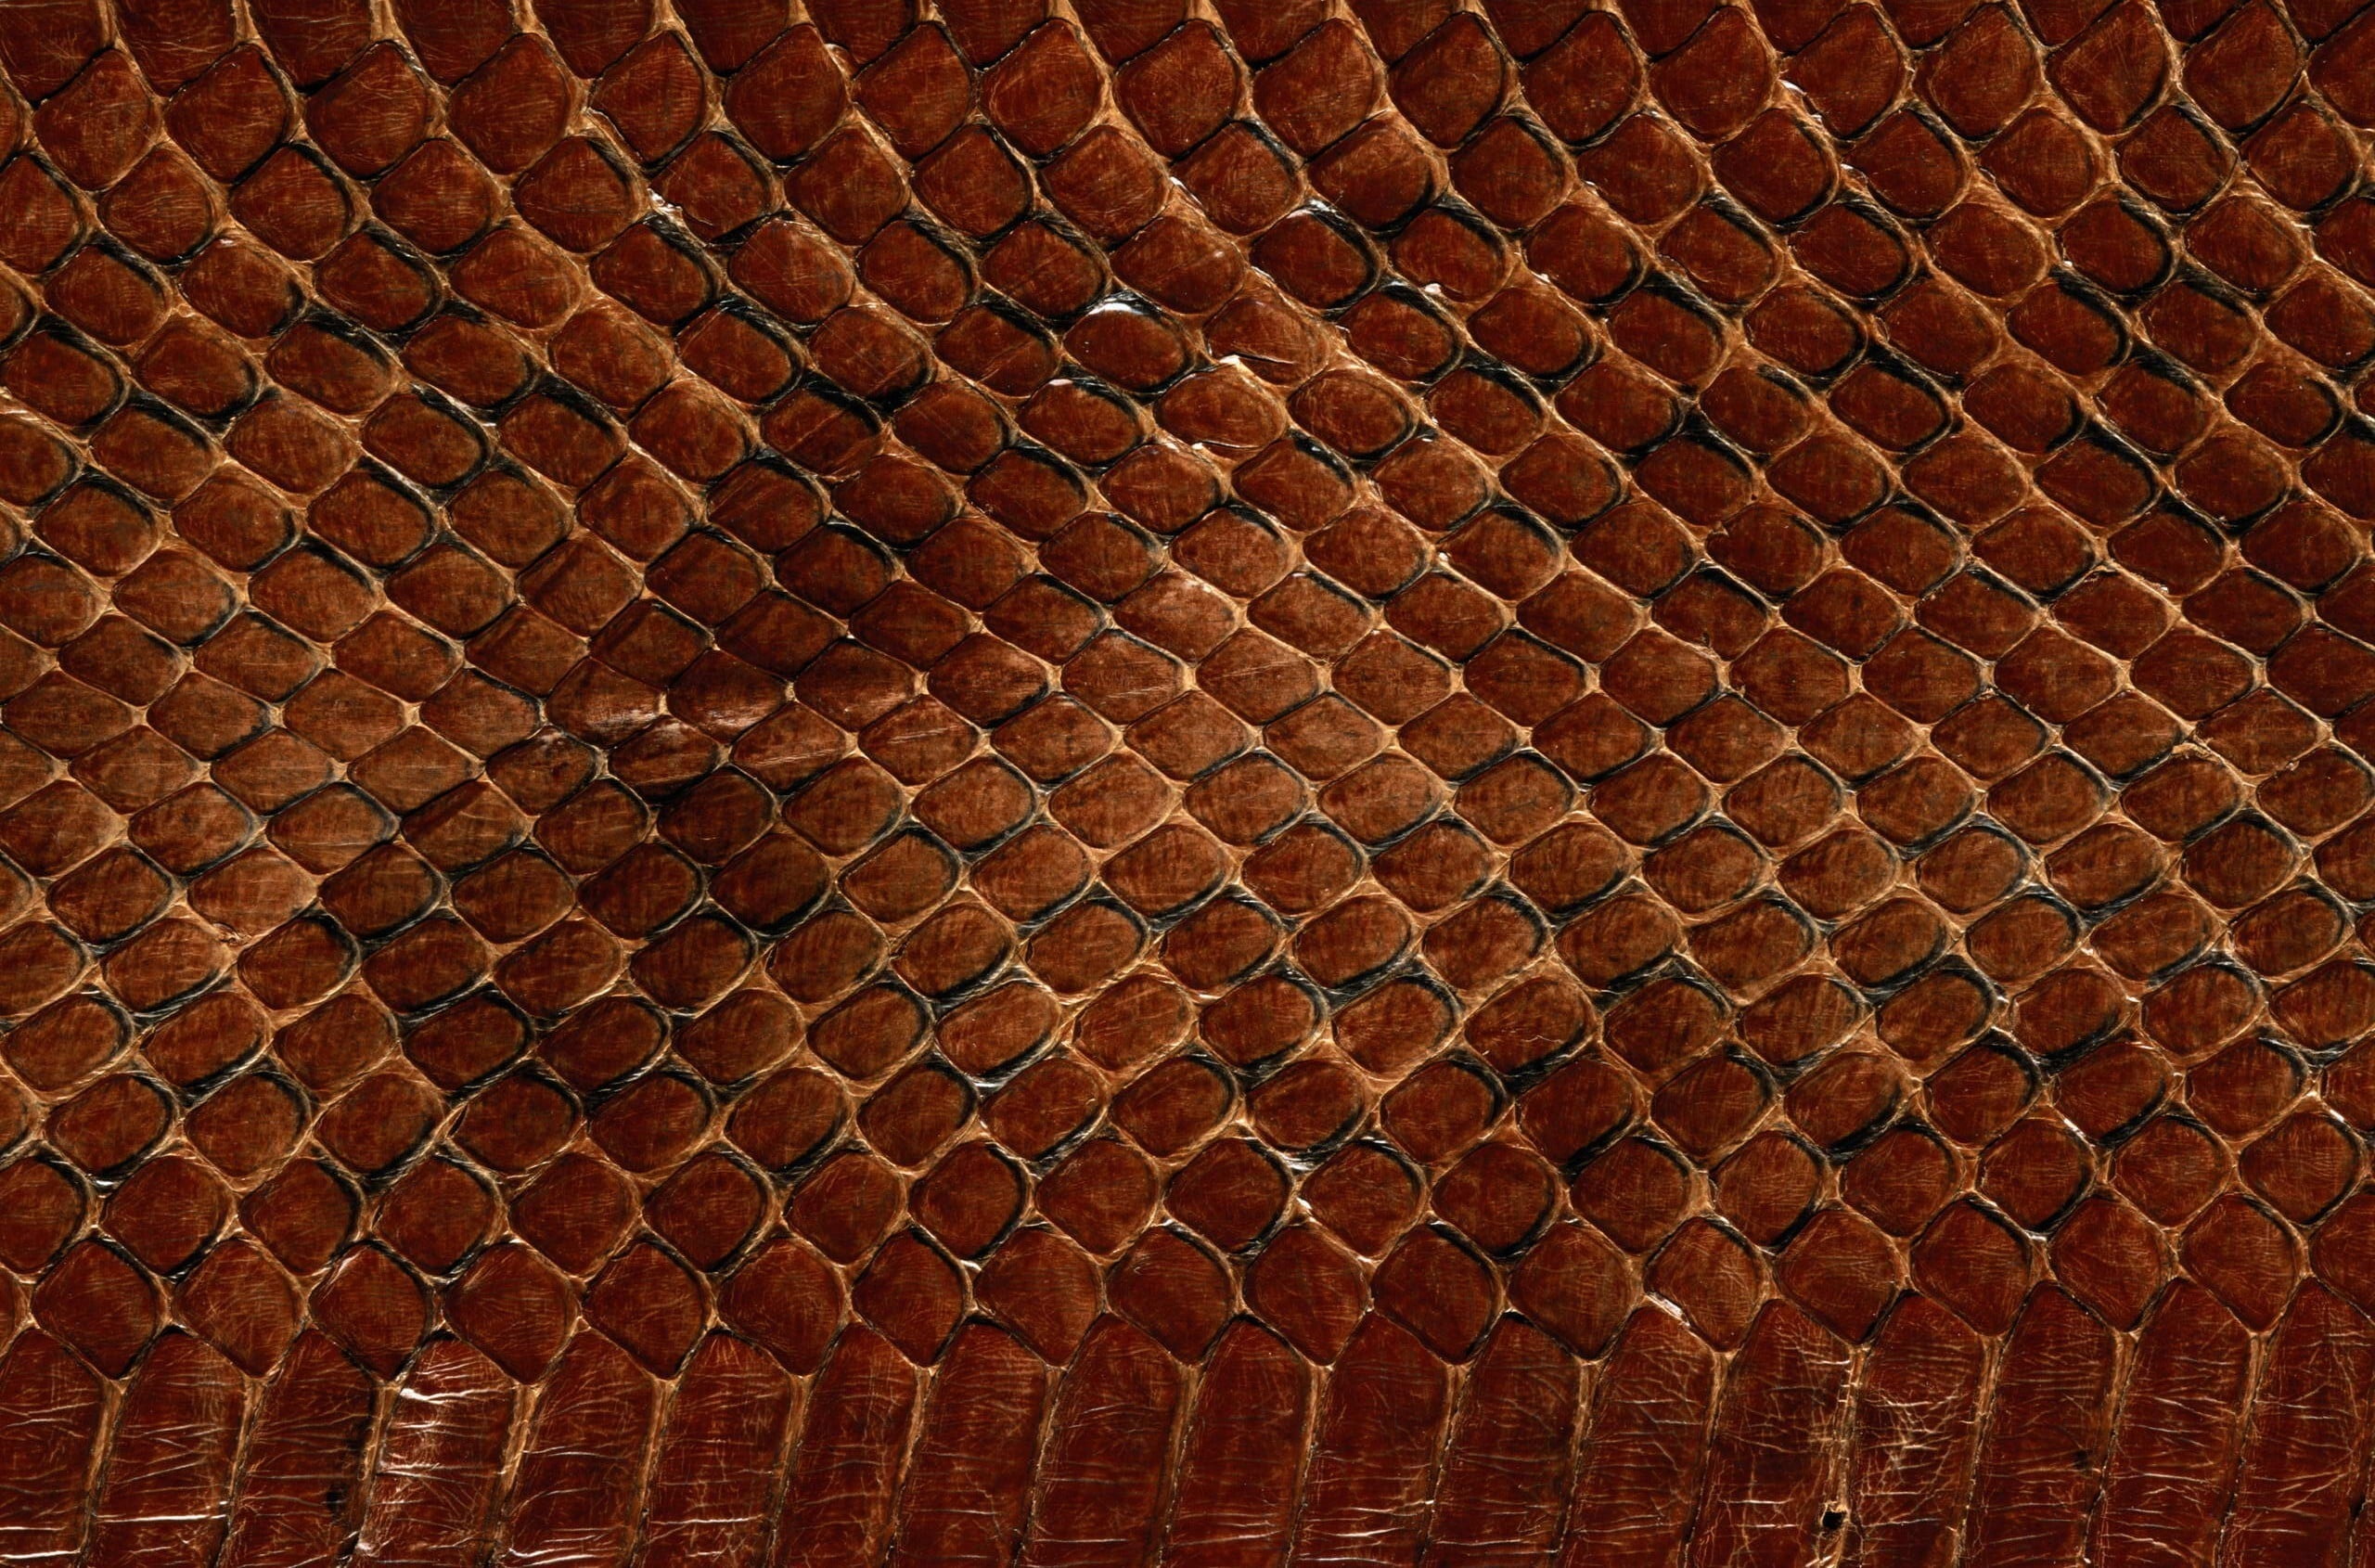 brown concrete pavement, texture, leather, snake, scales, background